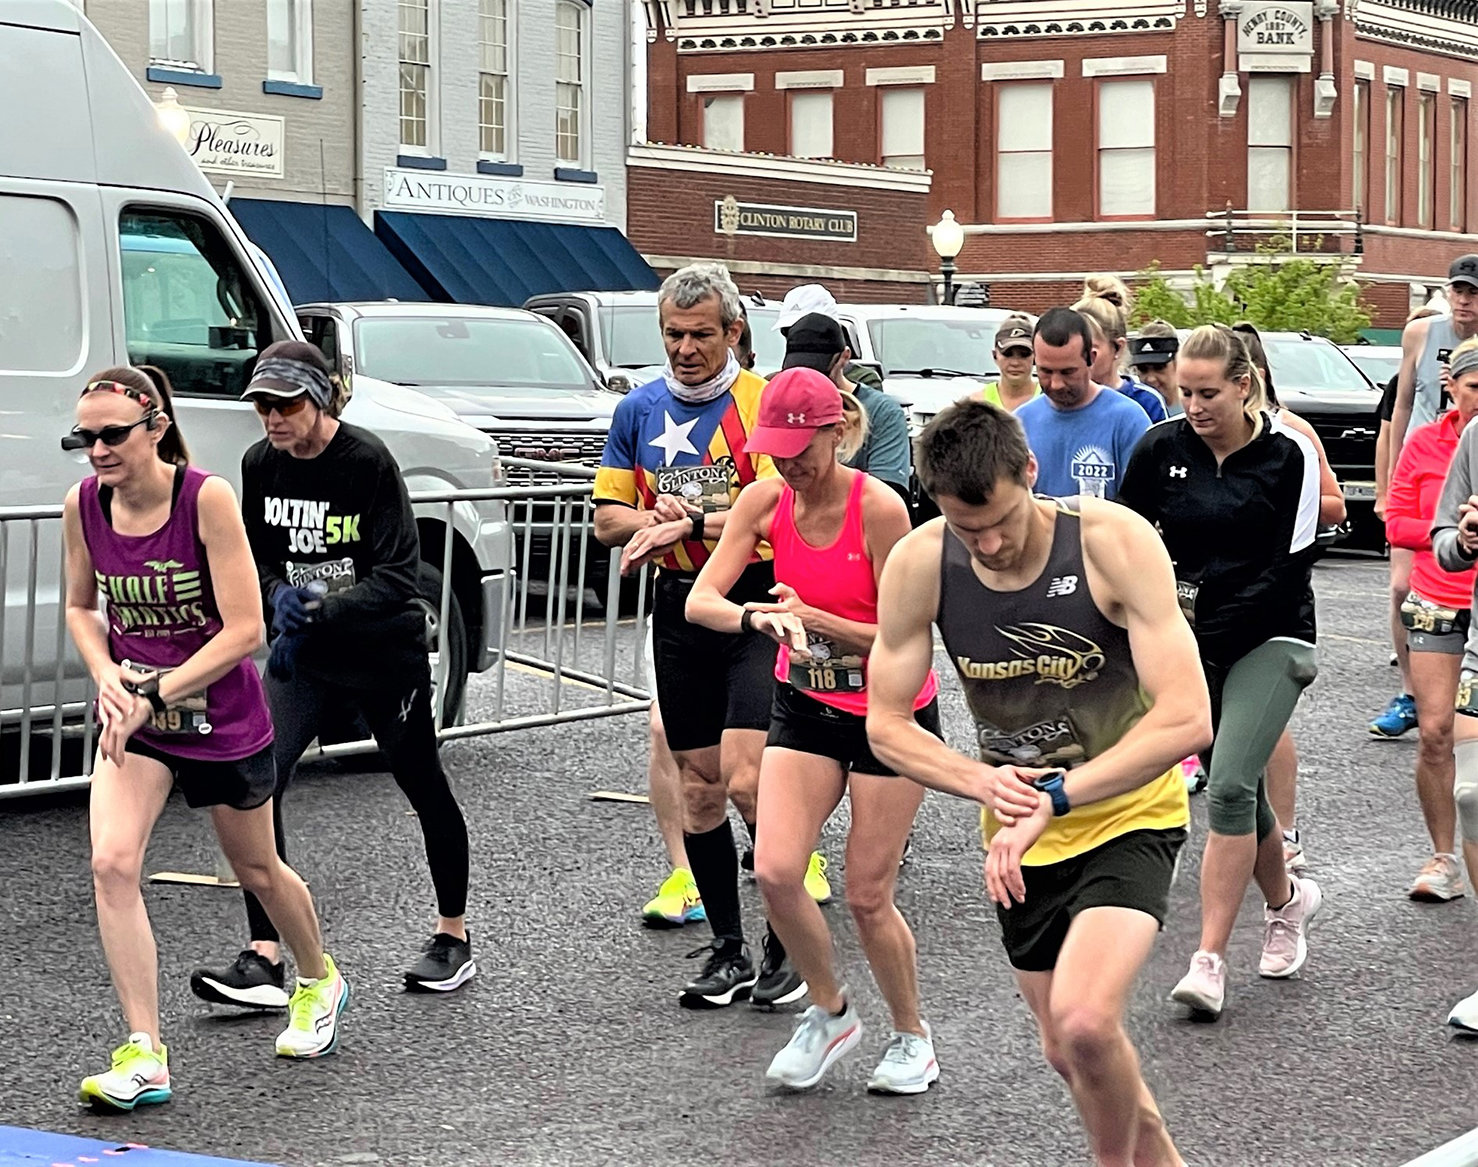 DOWNTOWN CLINTON welcomed runners to the 6th Annual Clinton Historic Half Marathon over the weekend.  Most participants come from miles away to run the event.